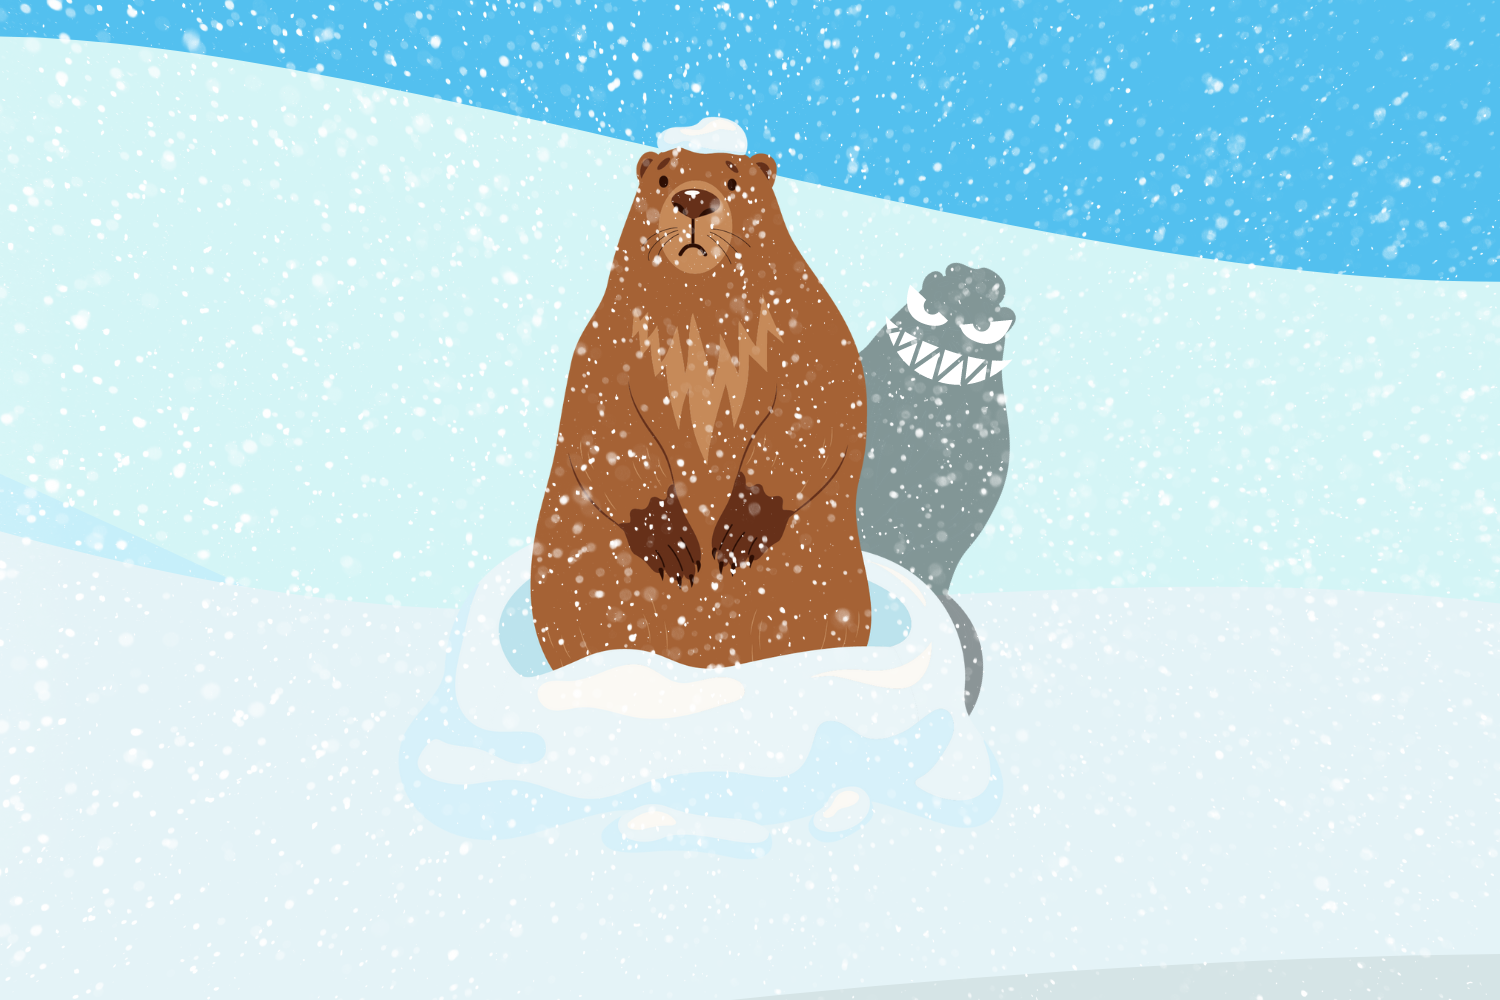 A frowning groundhog sits in a blizzard while his shadow sports an evil grin. (Hustler Multimedia/Sofia El-Shammaa)